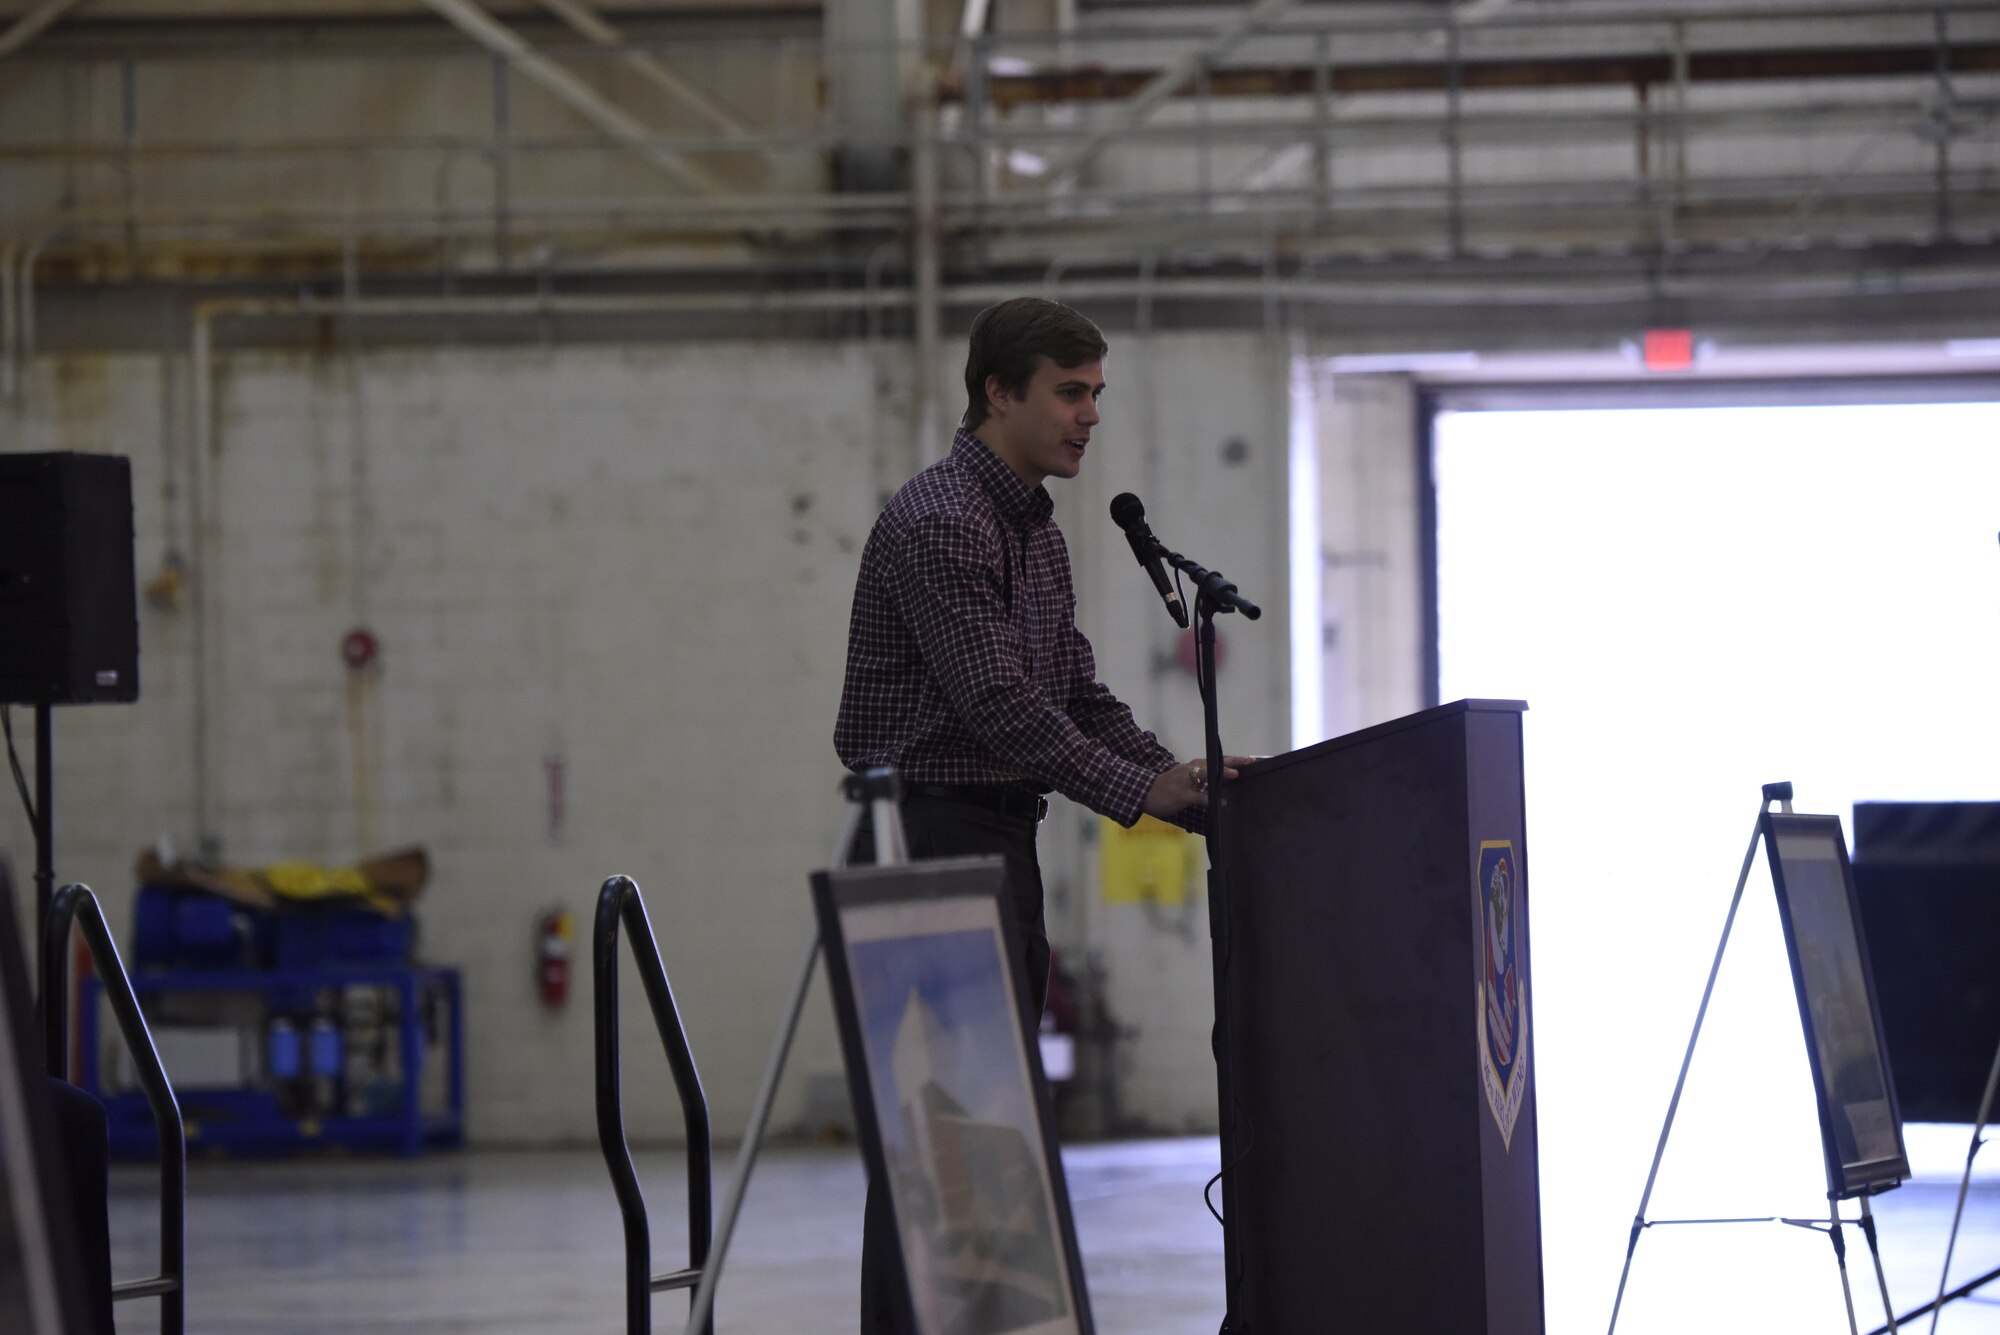 Alex Cannon, son of fallen U.S. Air Force Senior Master Sgt. Robert Cannon delivers a speech during the building dedication ceremony in honor of his father and three other members of the MAFFS 7 crew, at the North Carolina Air National Guard Base, Charlotte Douglas International Airport, June 9, 2019. Senior Master Sgt. Cannon tragically lost his life alongside 3 other C-130 crew members in an aircraft accident in 2012, the 145th Airlift Wing honored his and the other crew members sacrifice by naming four buildings across the wing after each one.